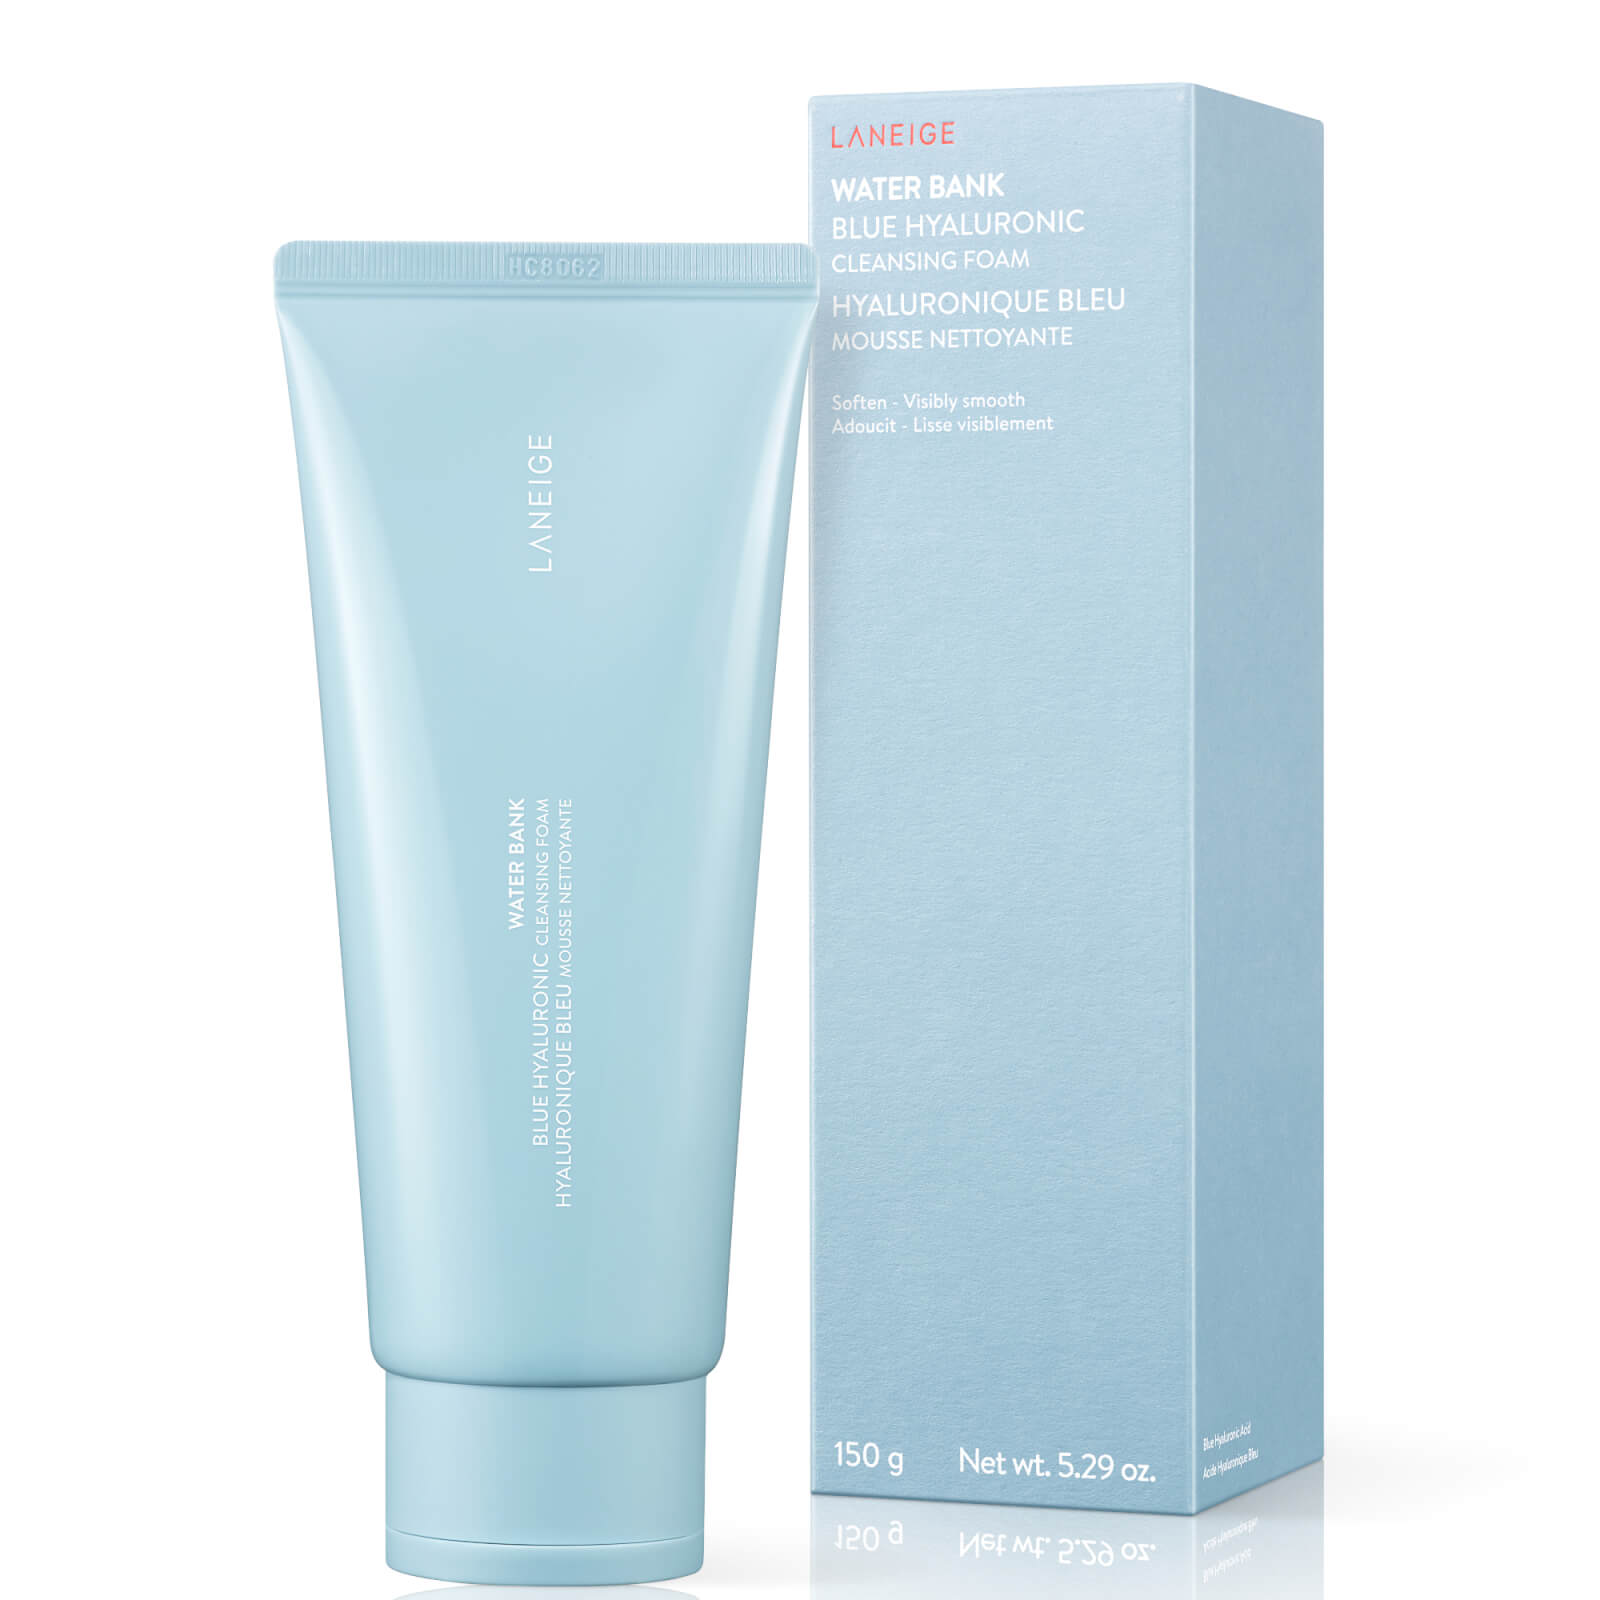 Photos - Facial / Body Cleansing Product Laneige Water Bank Blue Hyaluronic Cleansing Foam 150g 